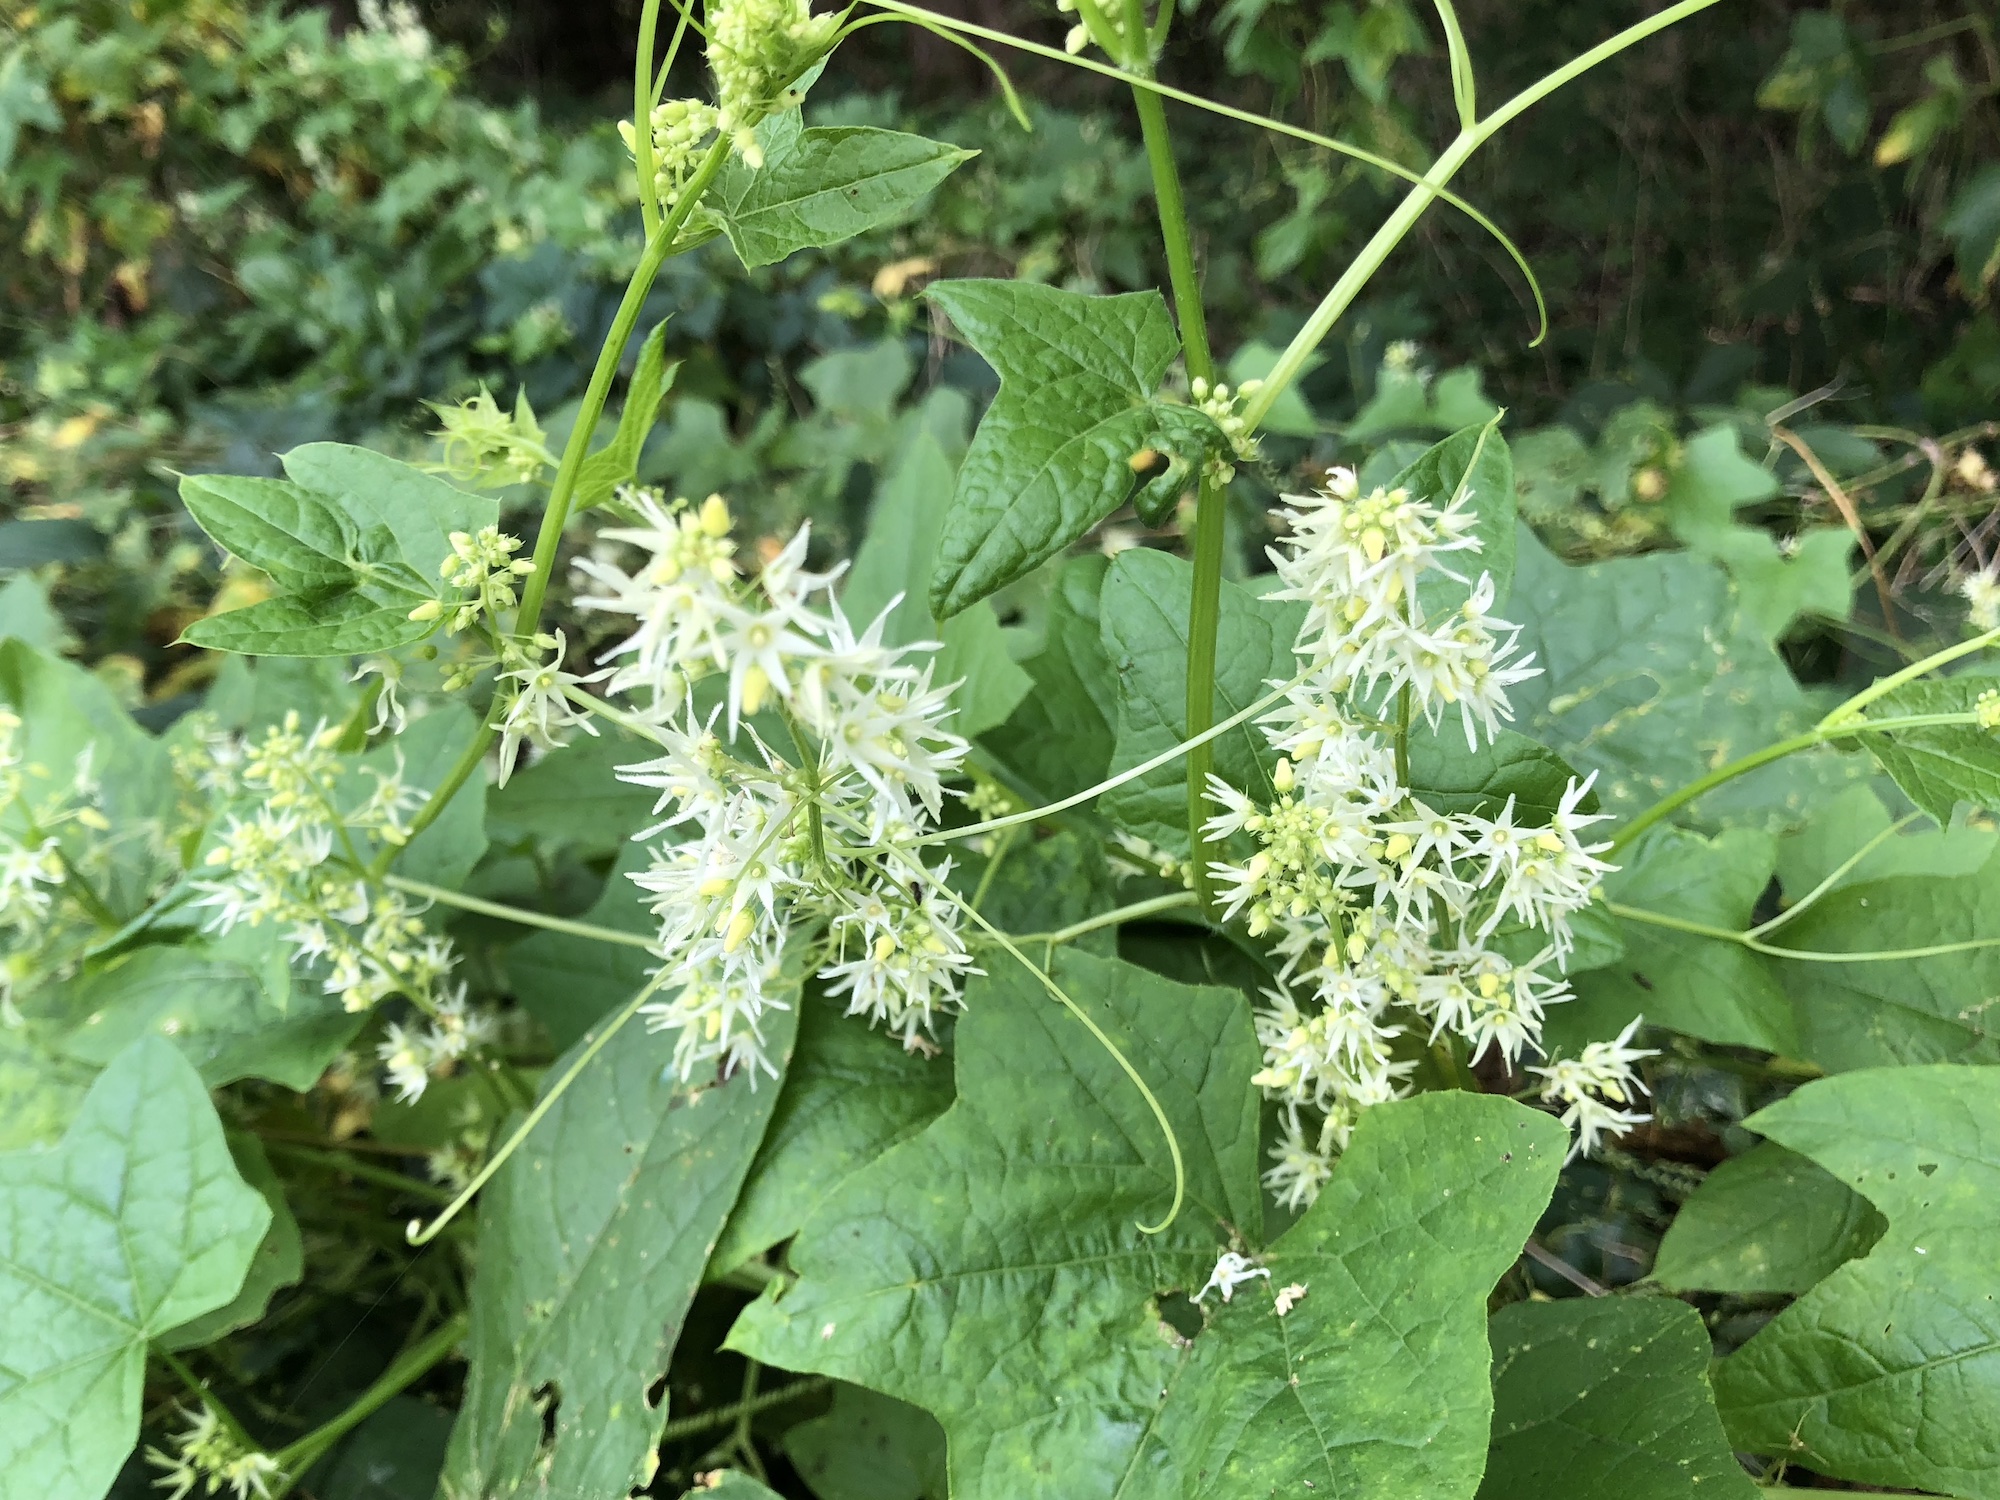 Wild Cucumber at edge of woods on Arbor Drive in Madison, Wisconsin on August 28, 2018.